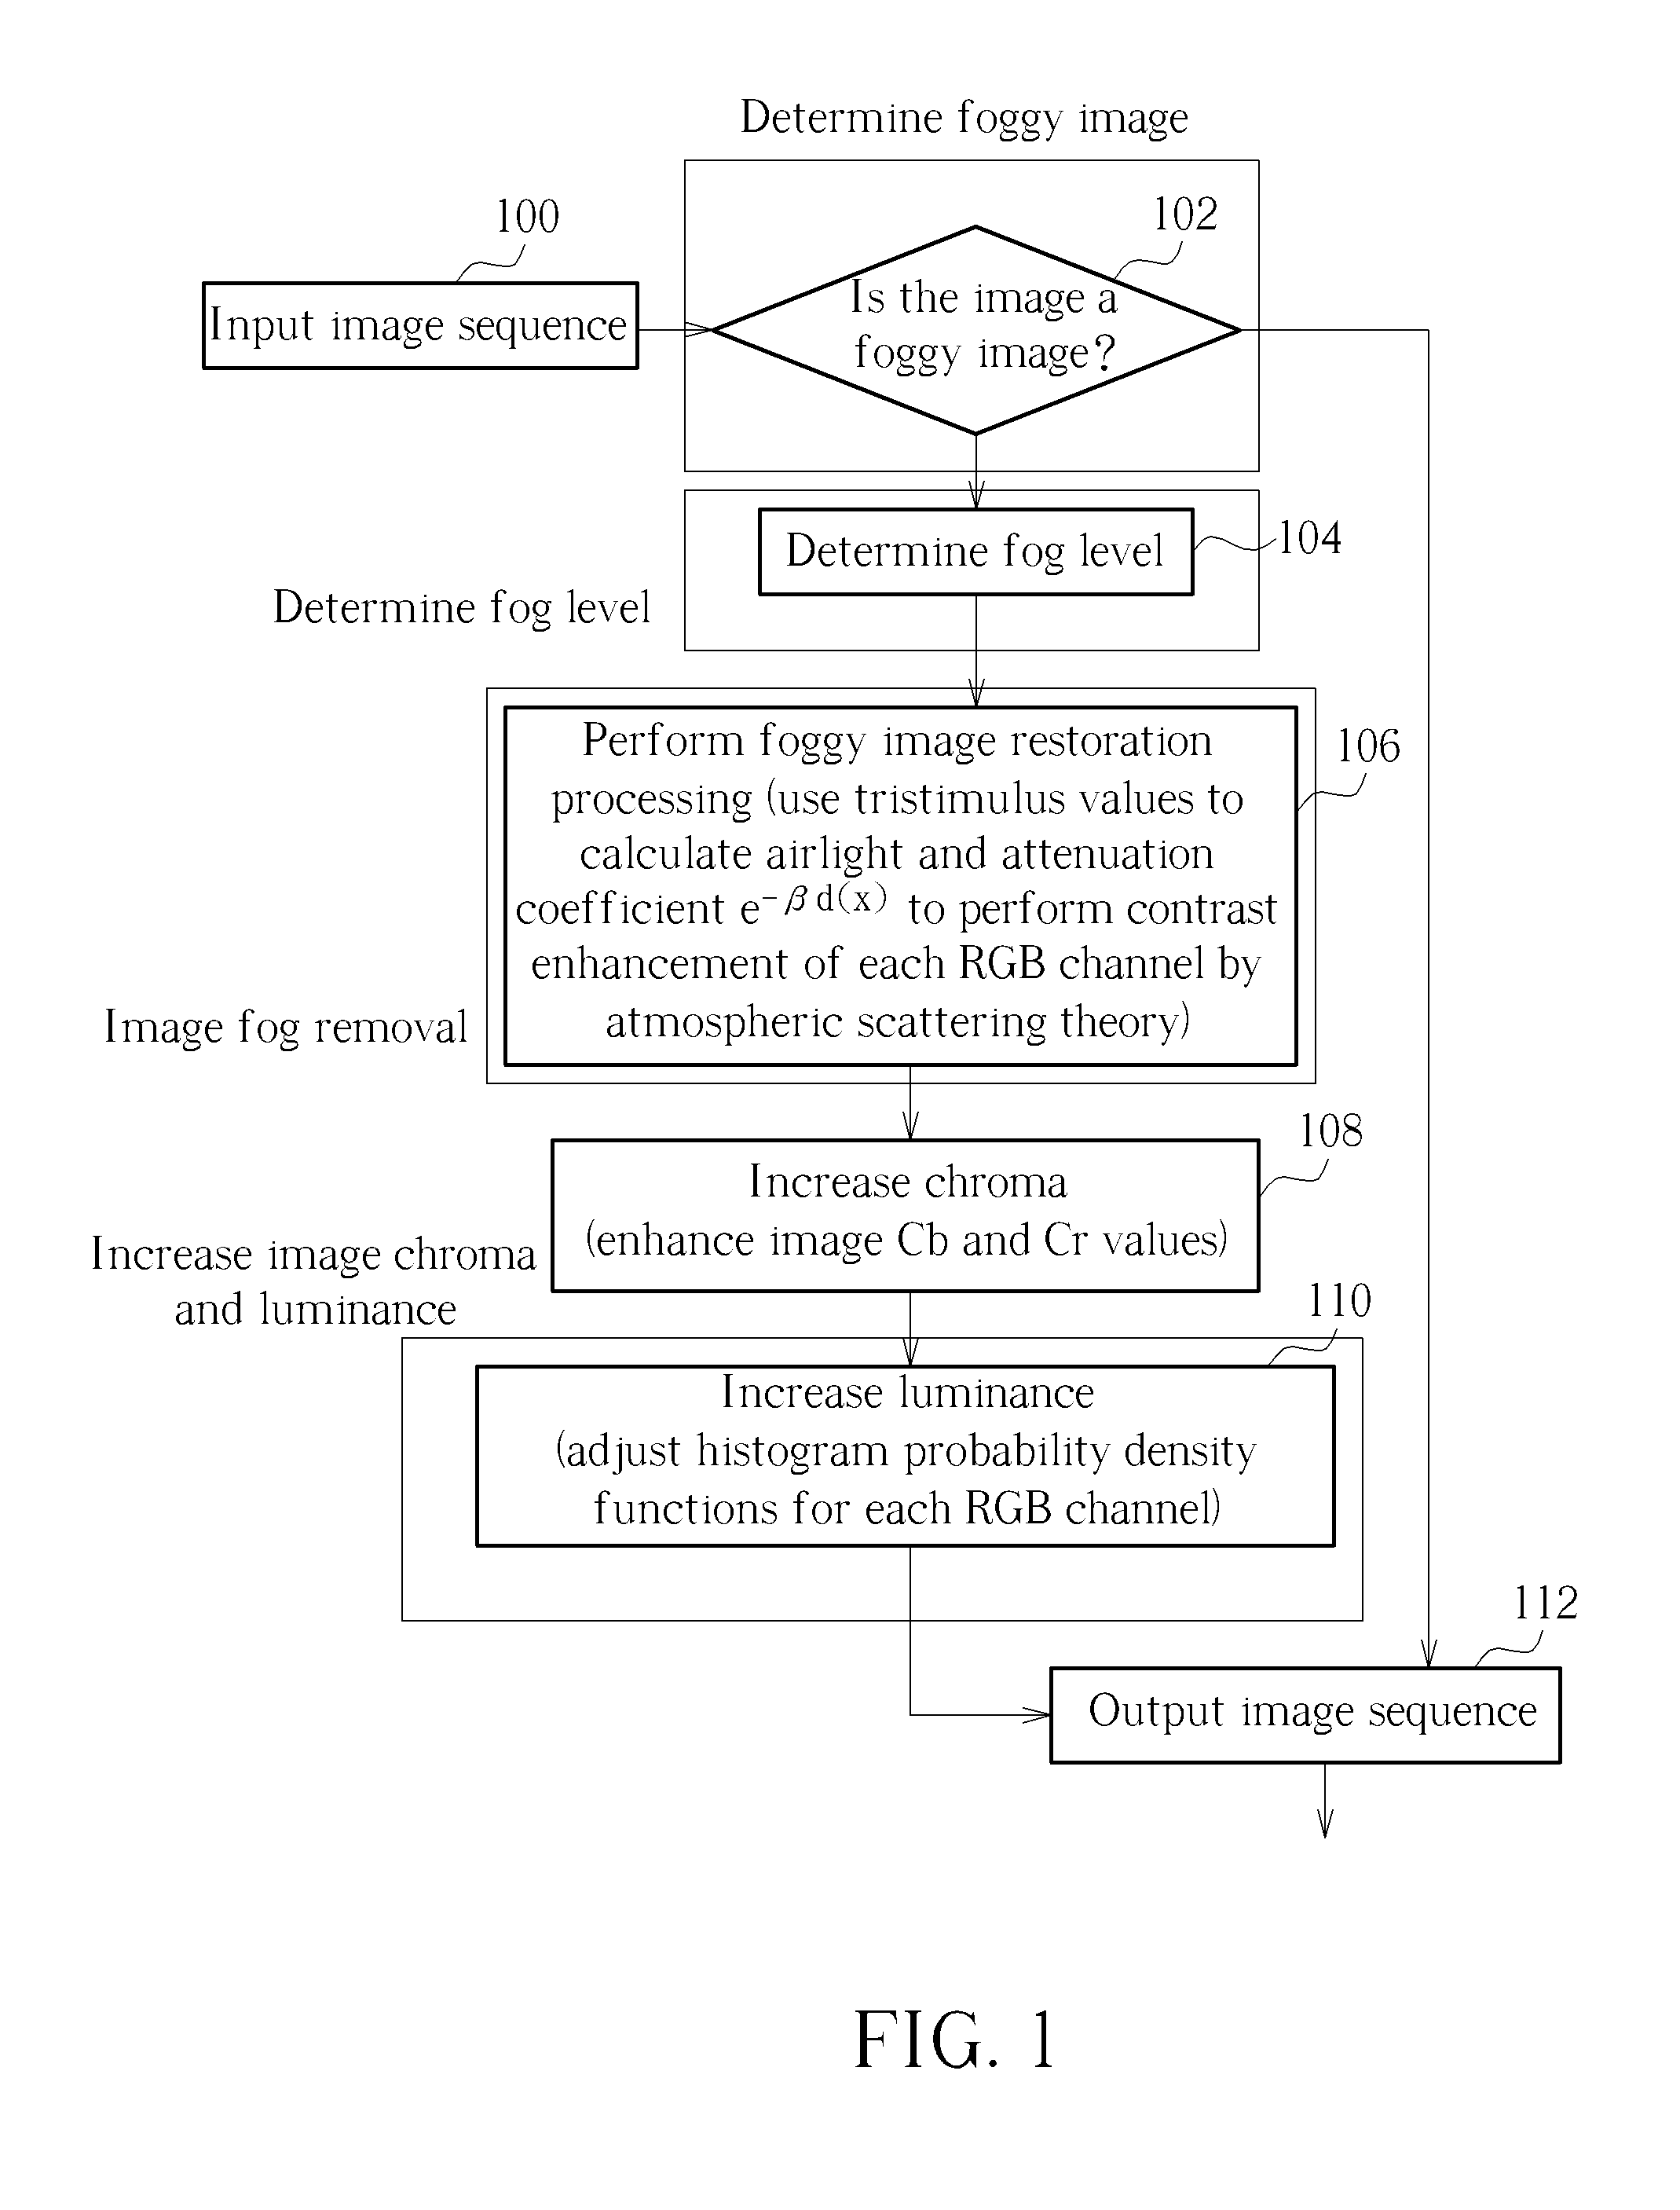 Method for determining if an input image is a foggy image, method for determining a foggy level of an input image and cleaning method for foggy images